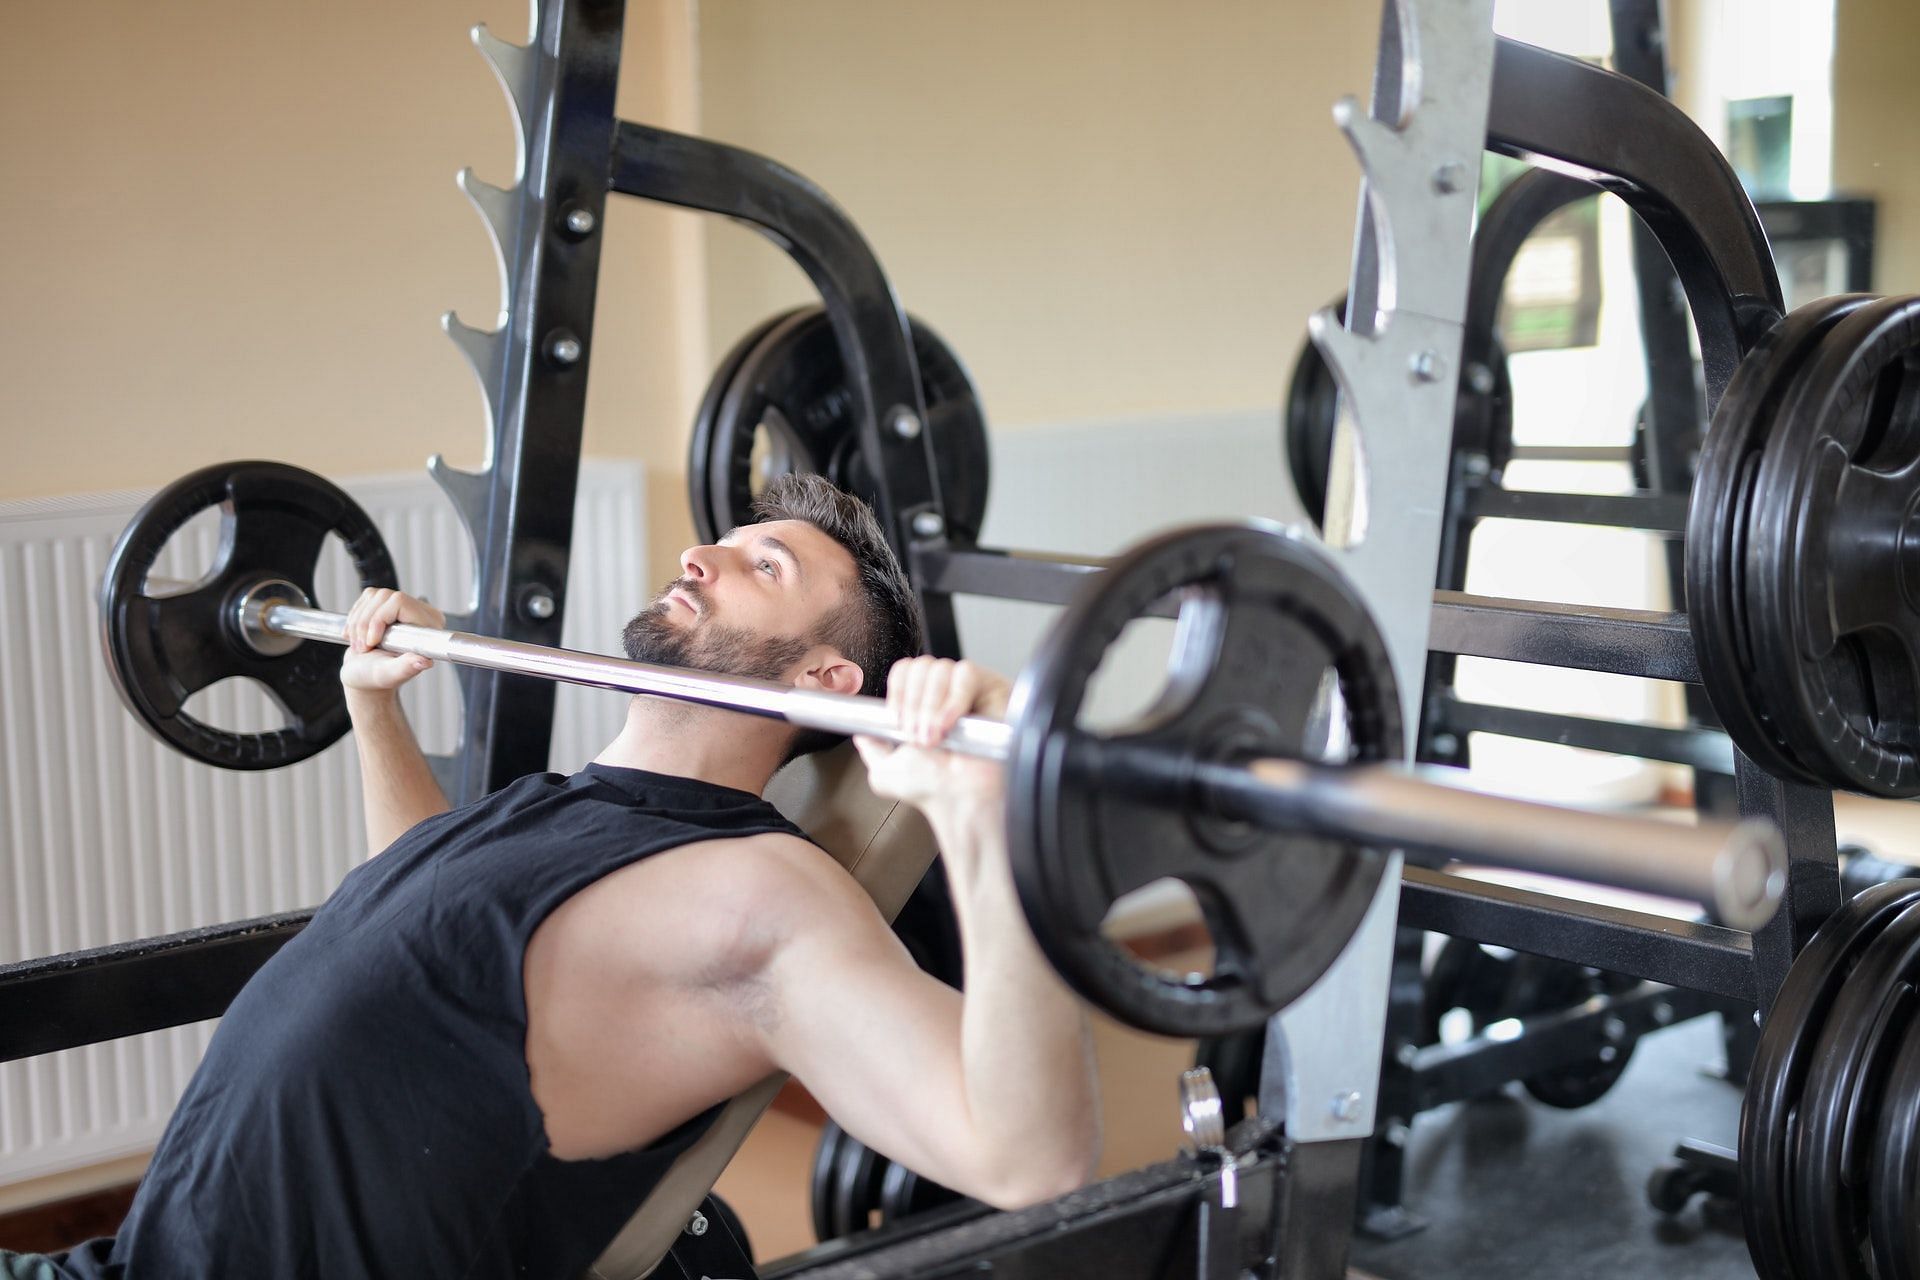 Guide to best compound chest exercises for growth. (image via Pexels/Photo by Andrea Piacquadio)